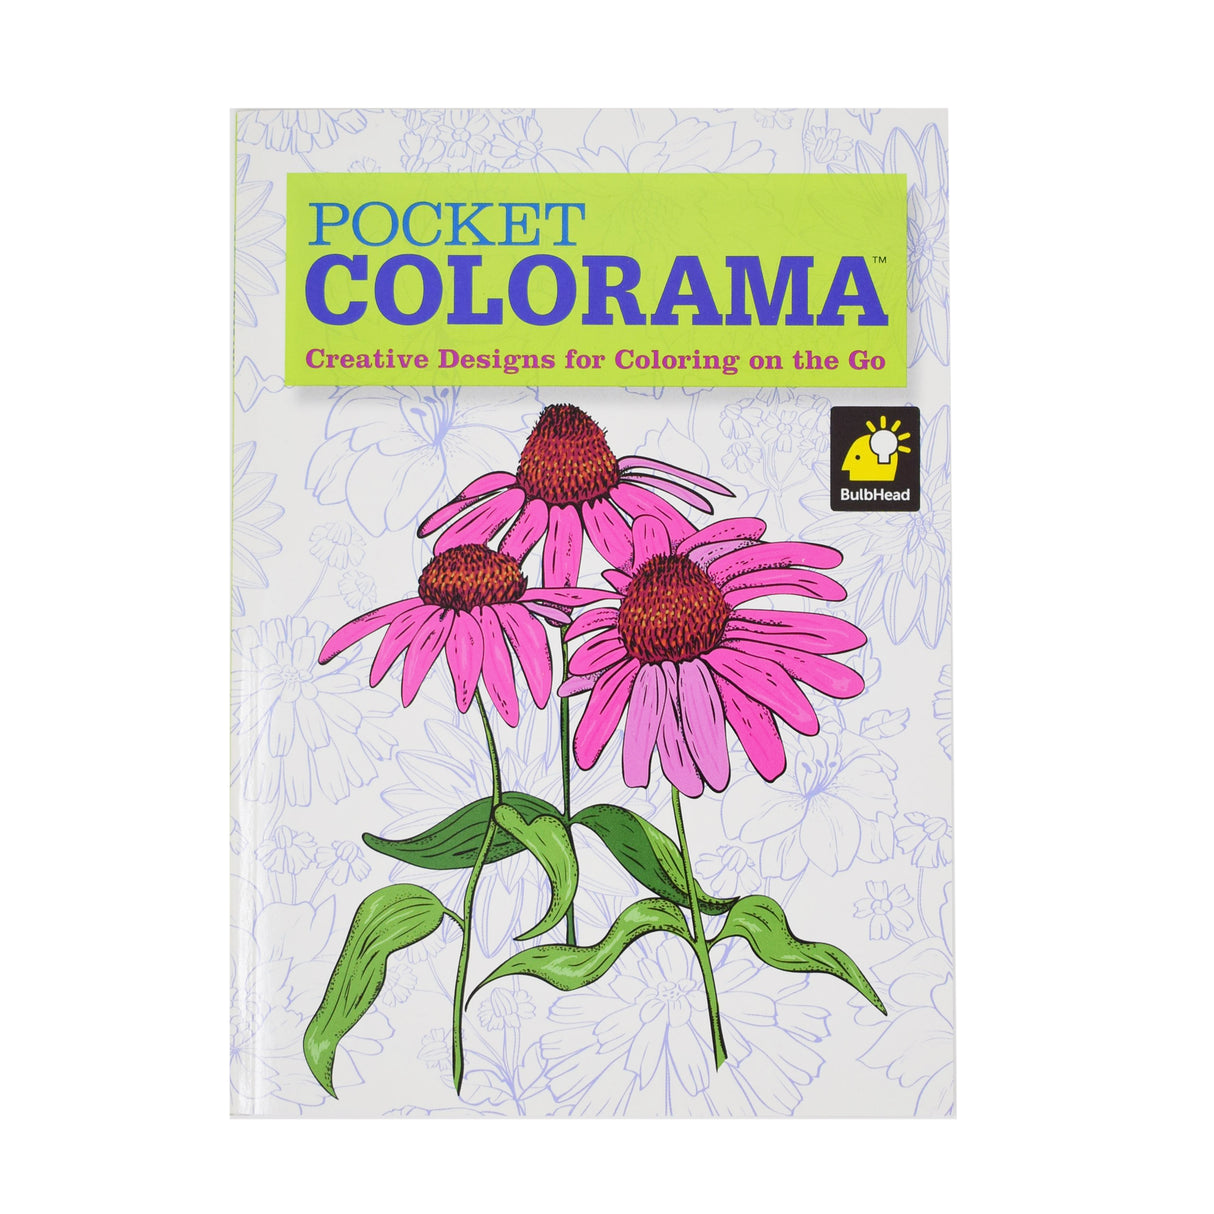 Colorama Adult Coloring Book Pocket Size 5 x 7, 15 Designs  Colorama Coloring Books